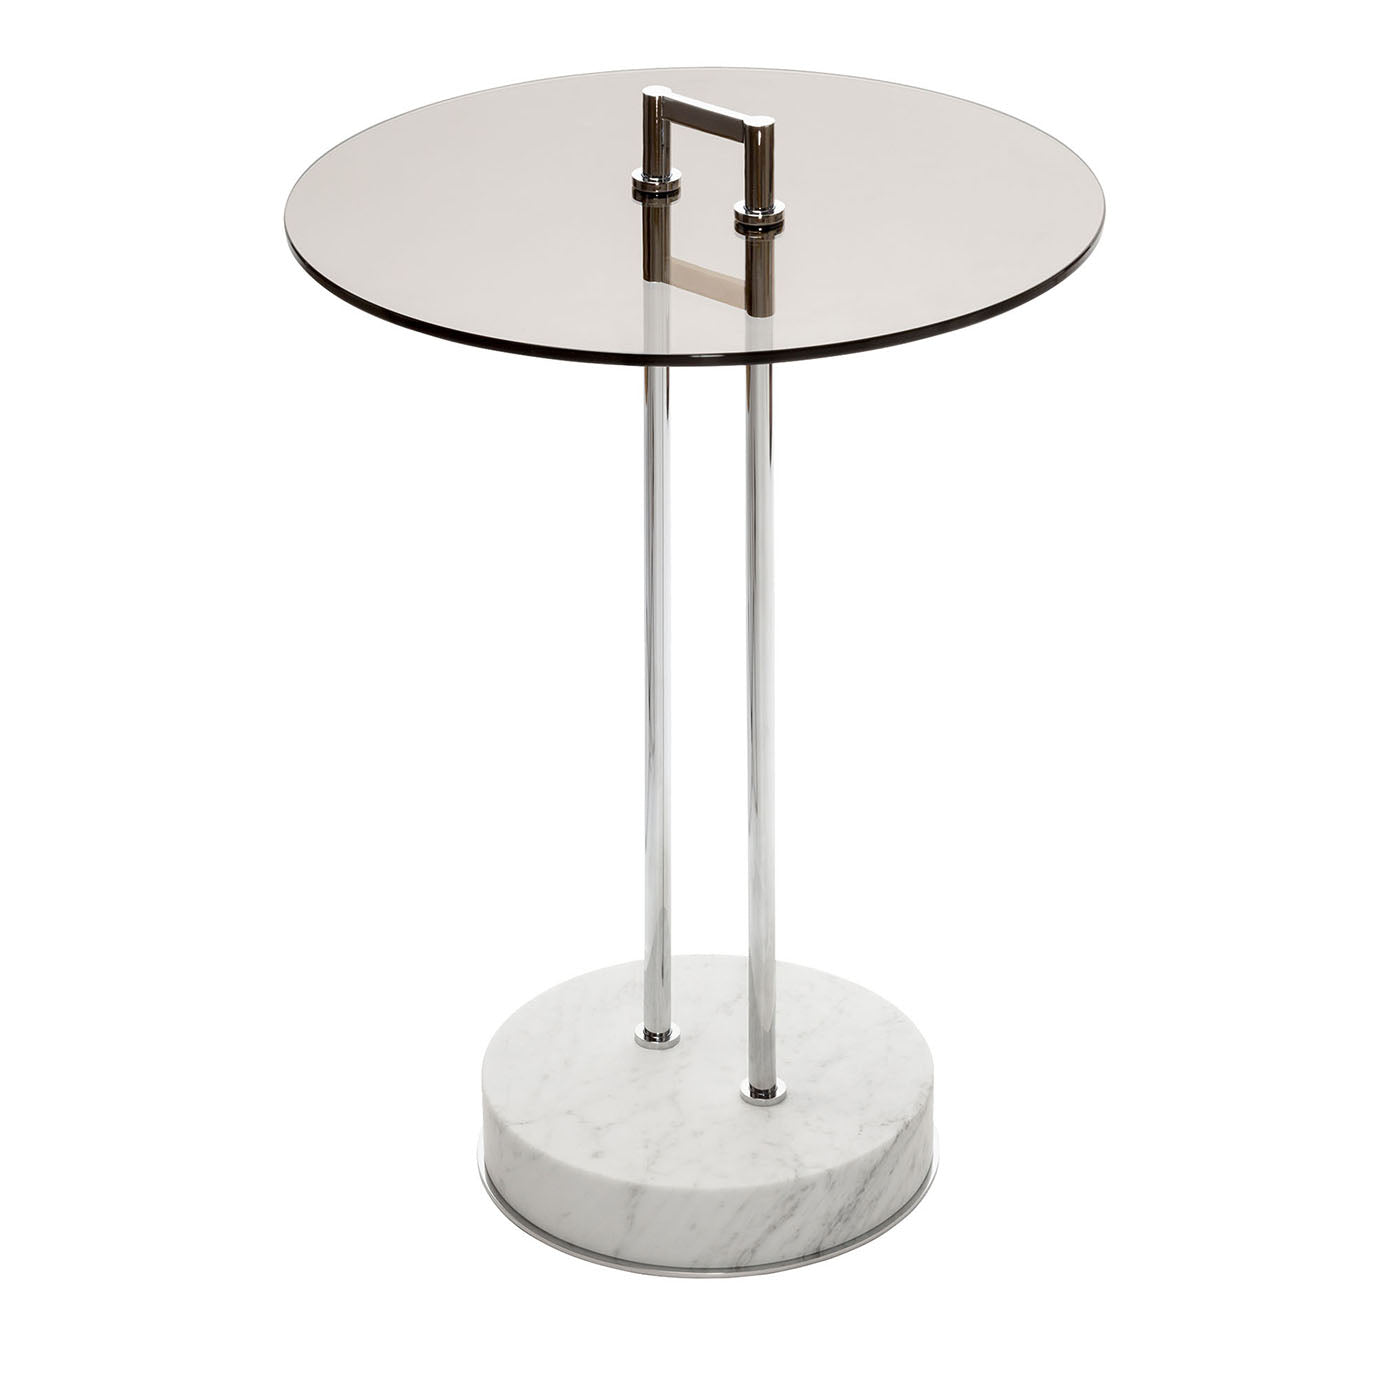 Urbino Marble Occasional Table #1 - Main view